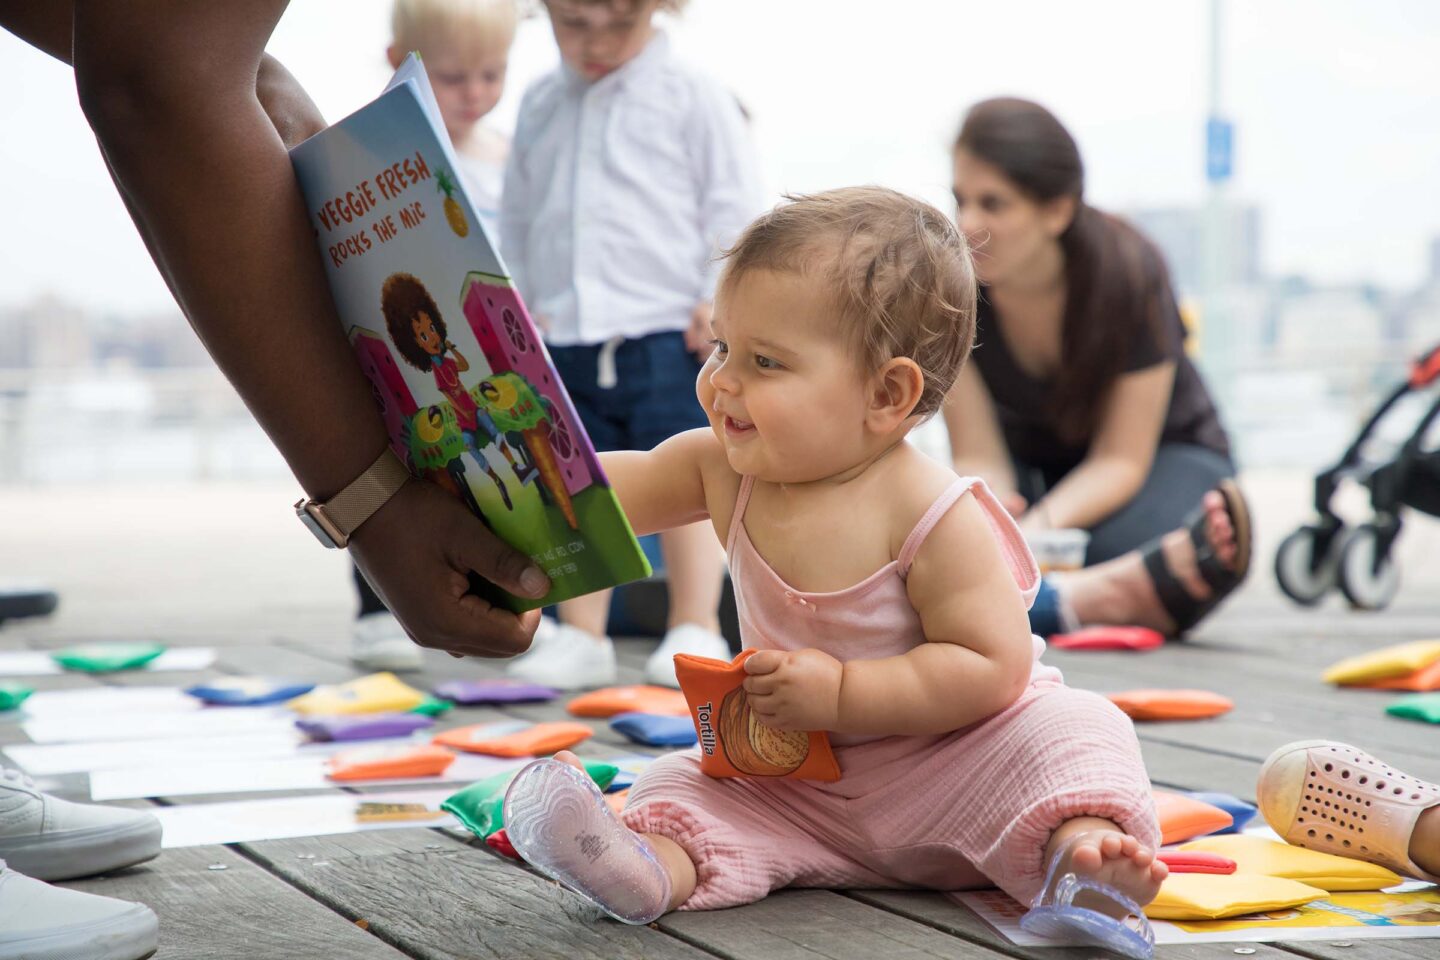 A baby smiles at the pictures in the book